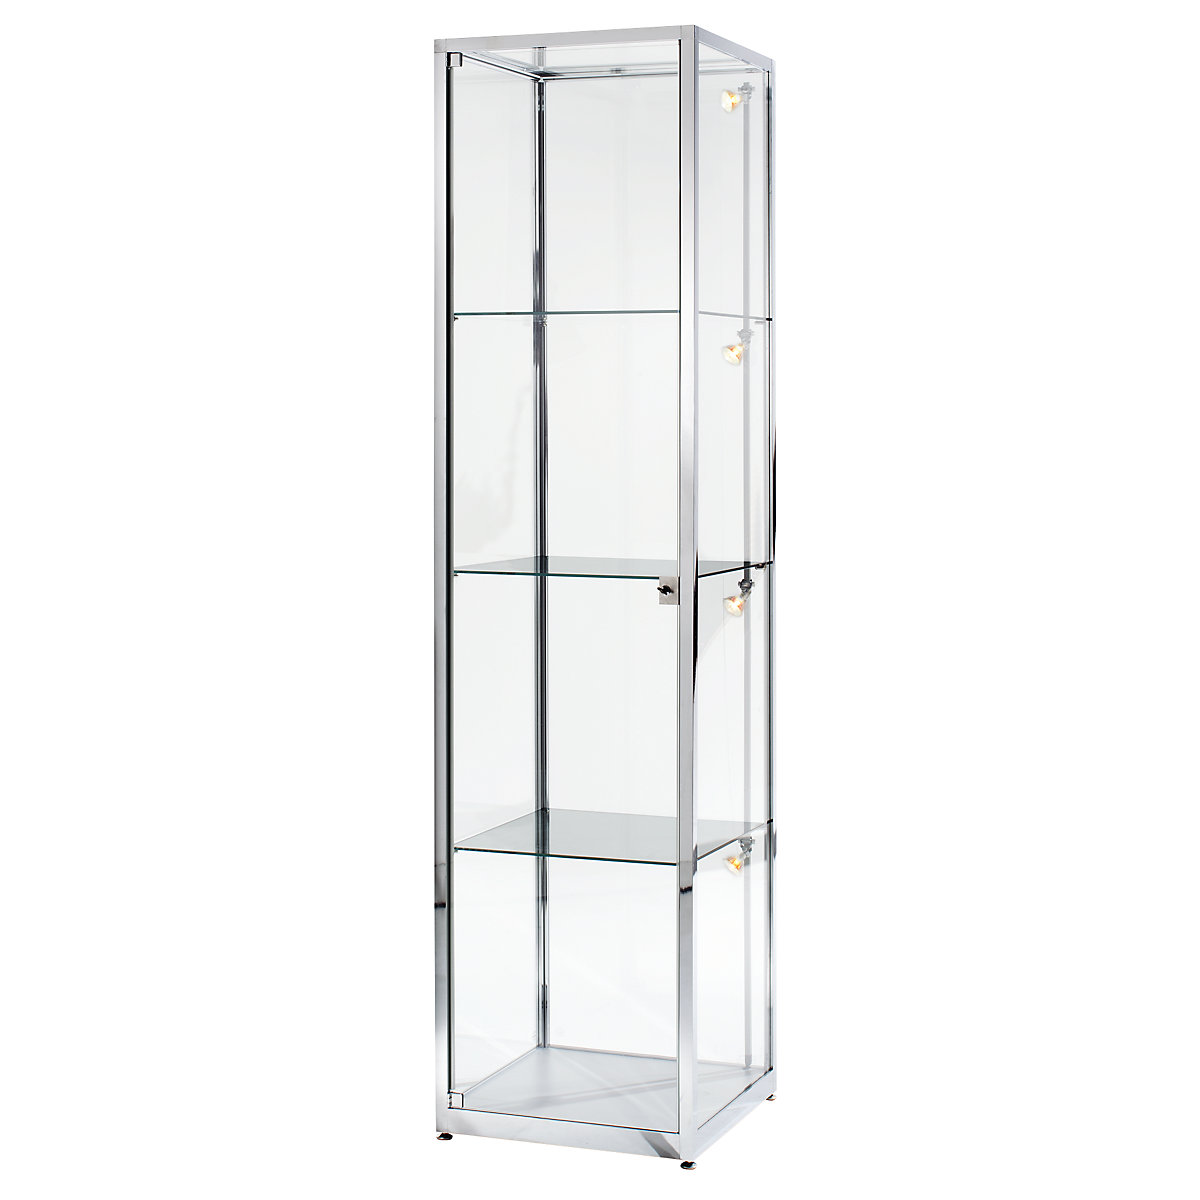 Tall glass cabinet, height 2000 mm, 1 hinged door, WxD 400 x 400 mm, bright chrome plated-3